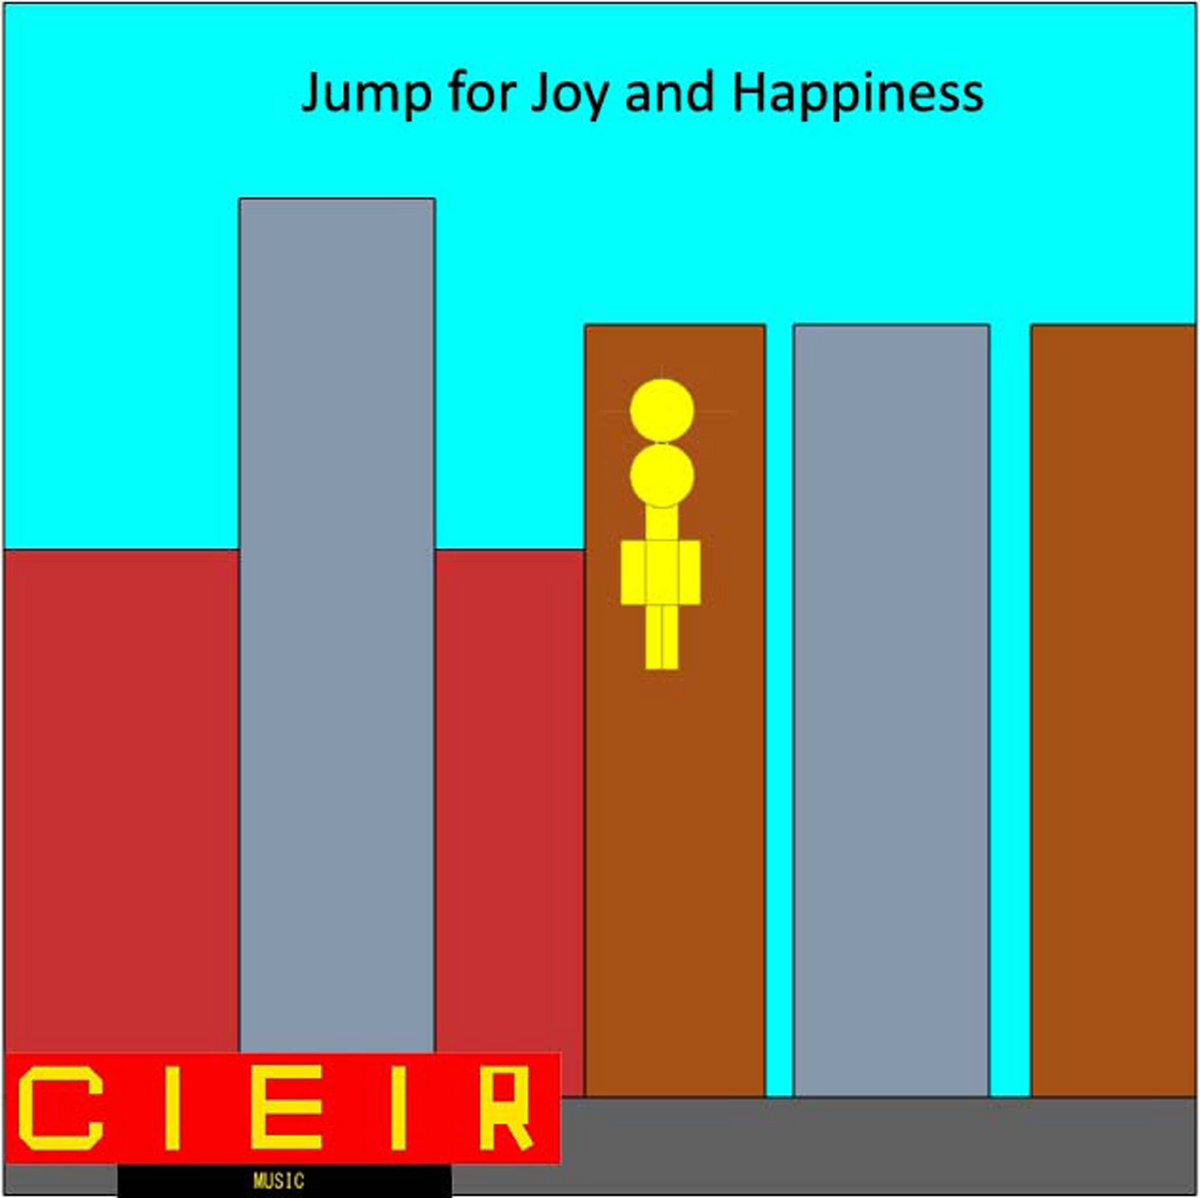 https://shanethemusician.bandcamp.com/track/jump-for-joy-and-happiness